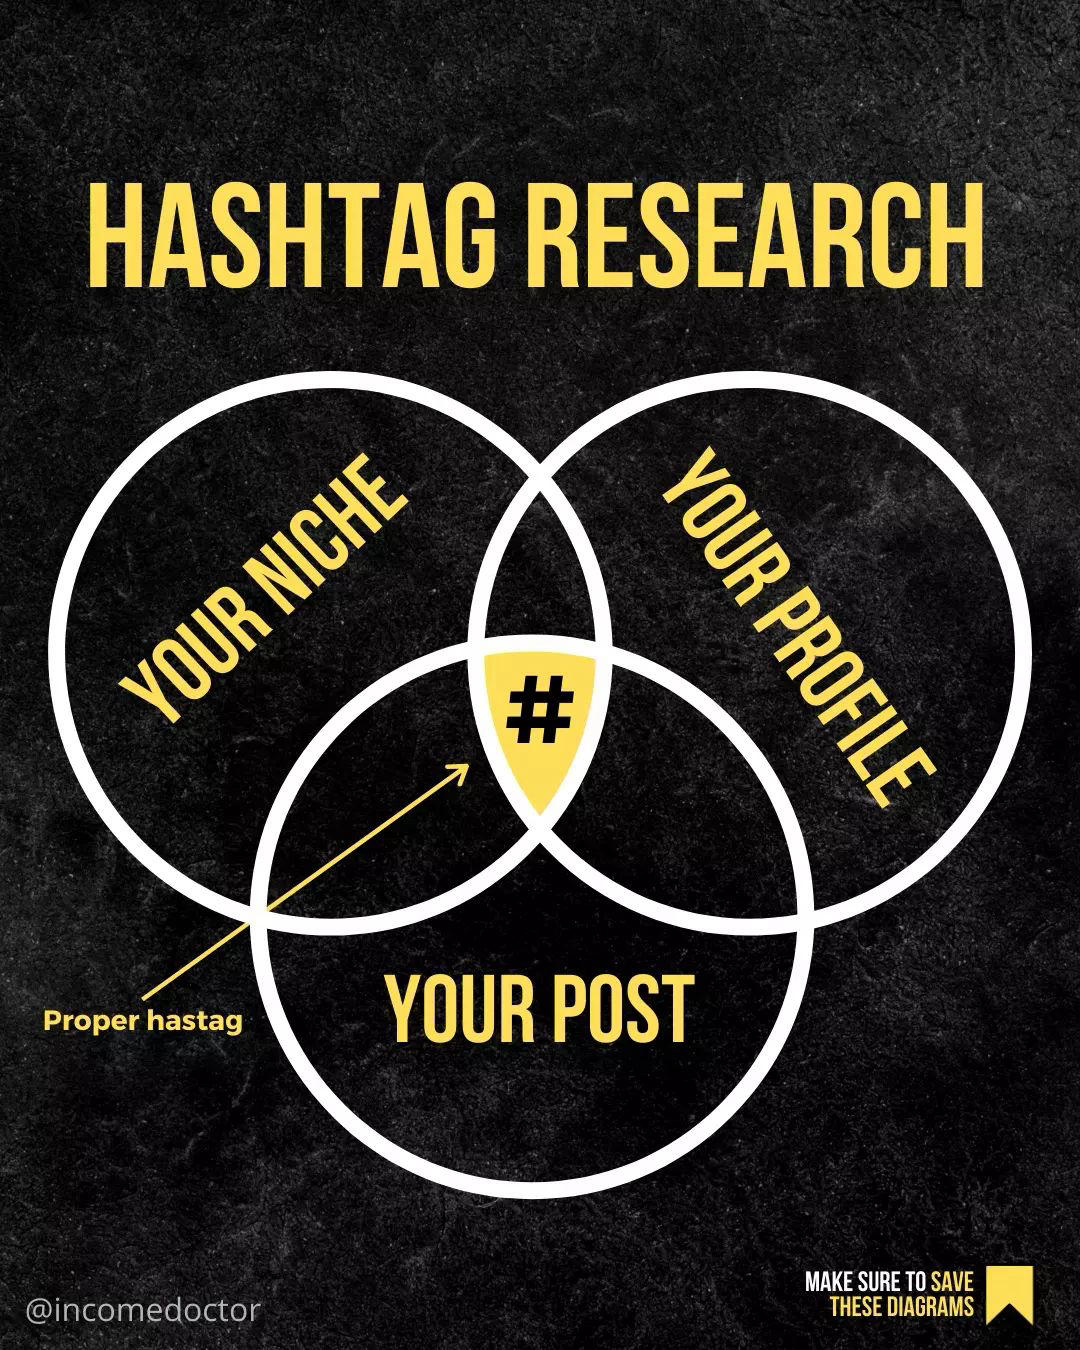 Vladimir ~ Brand & Design - Are you struggling with hashtags